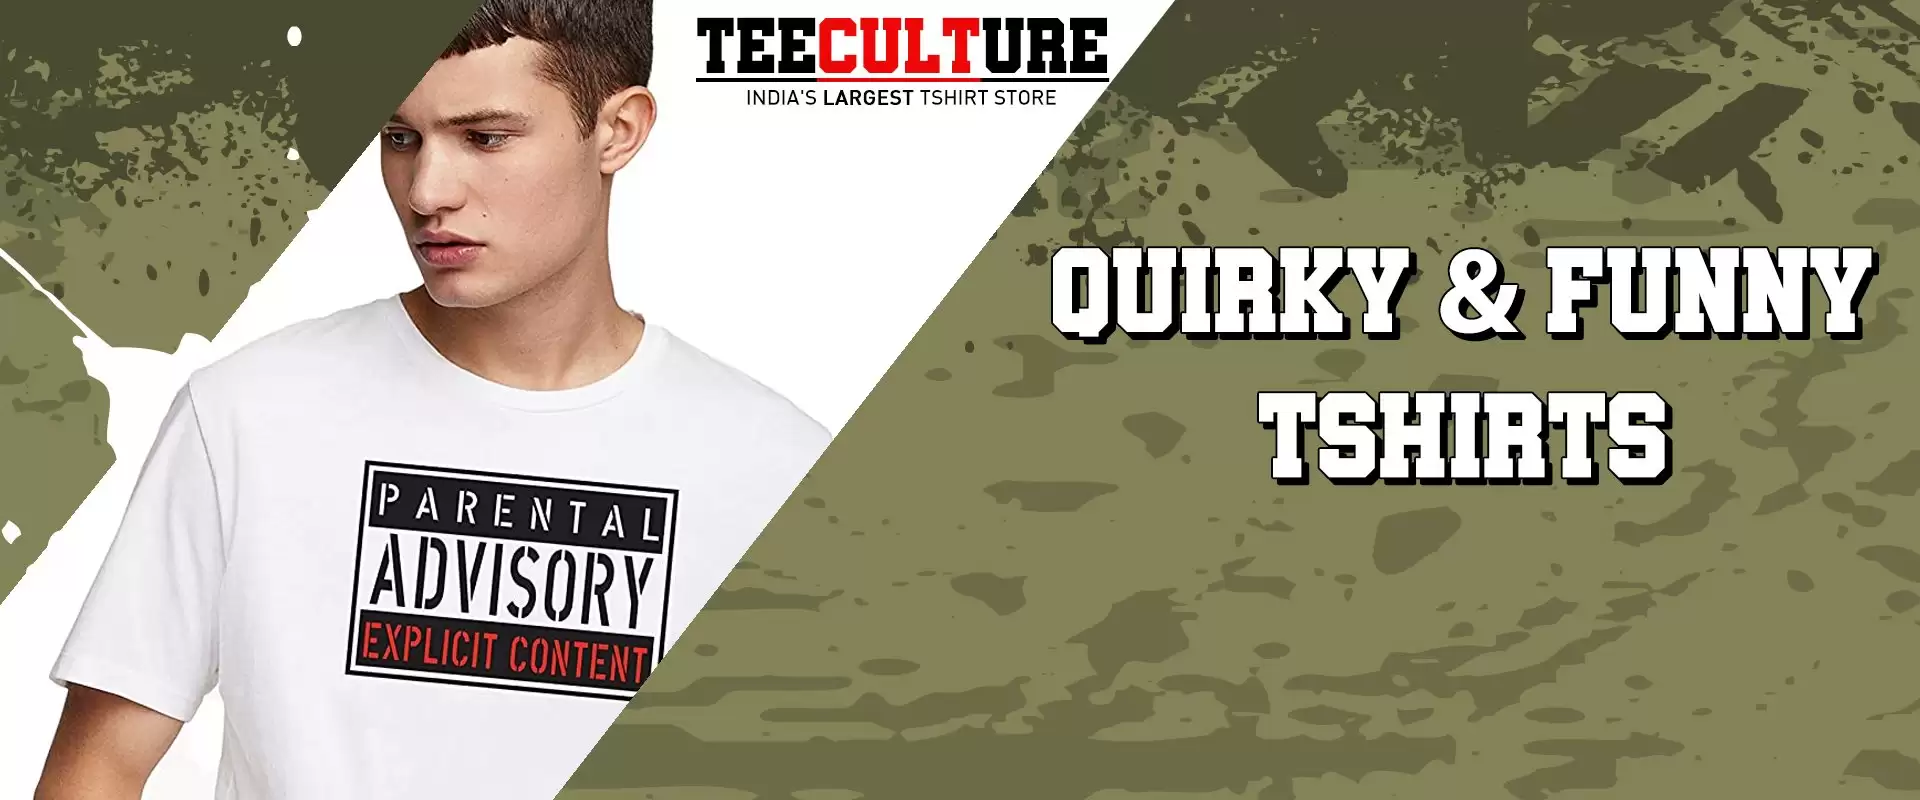 Flat 10% Off With This Discount Coupon At Teeculture.in